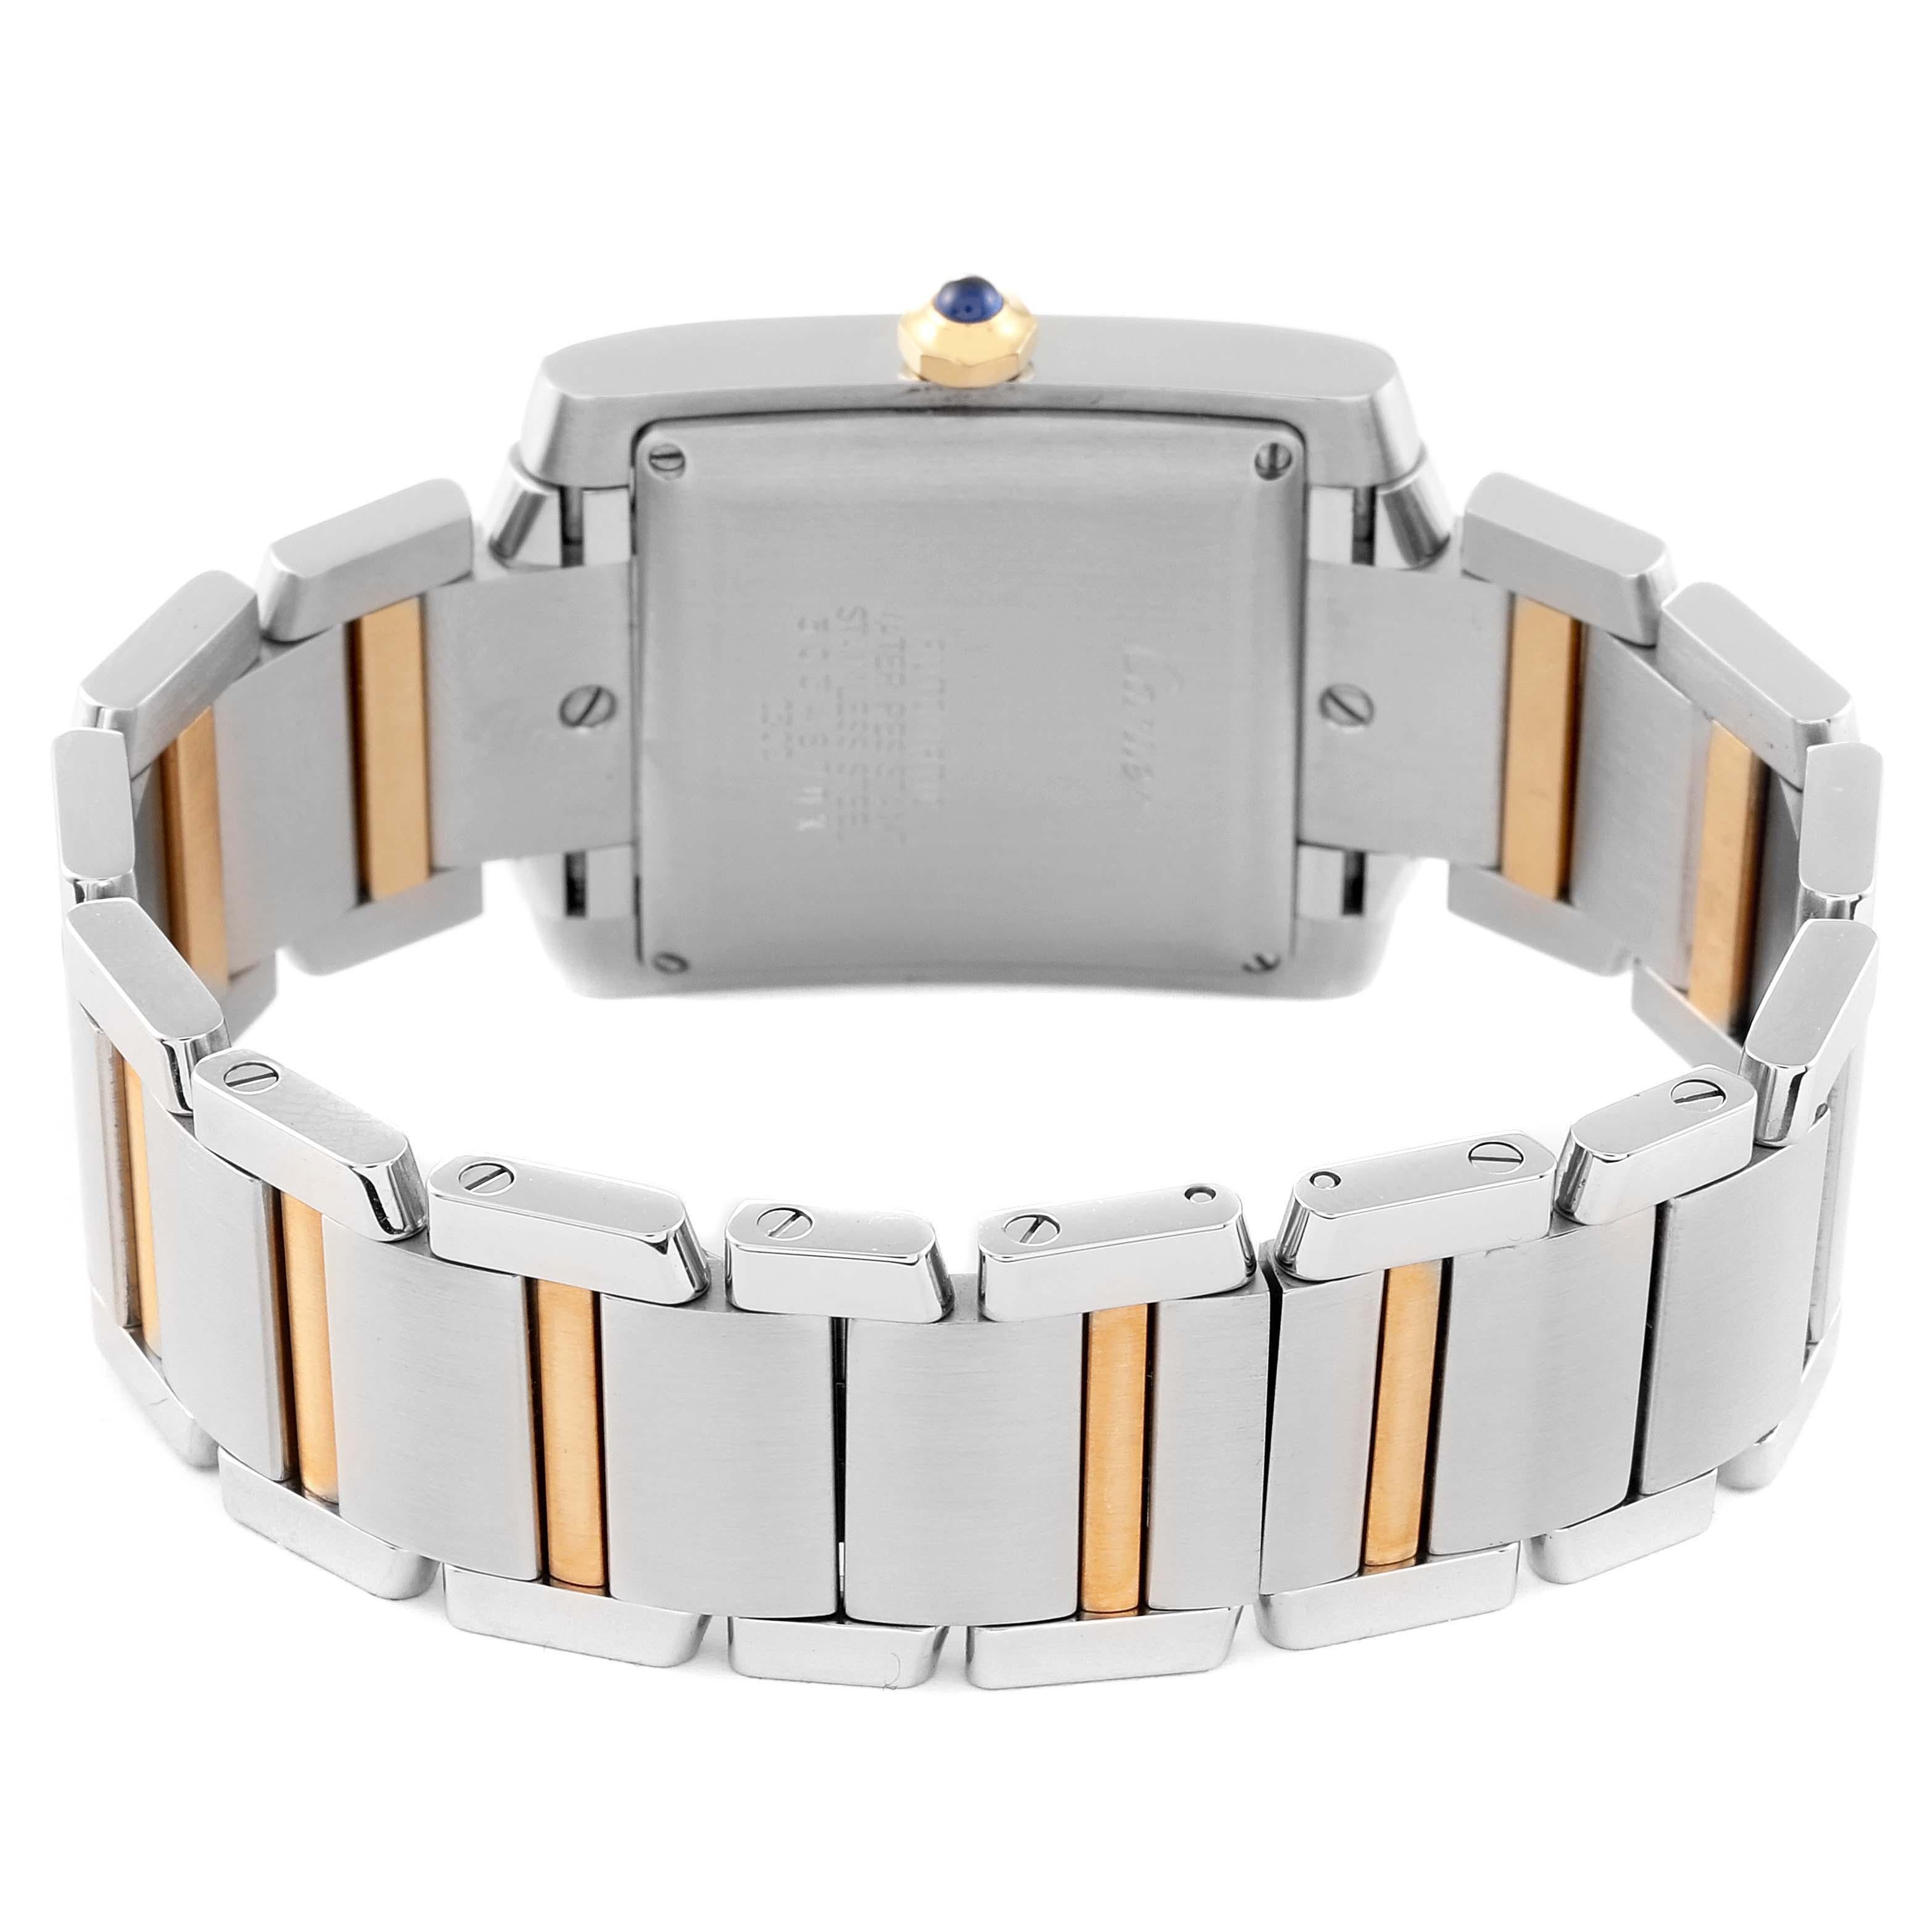 Cartier Tank Francaise Steel Yellow Gold Silver Dial Mens Watch W51005Q4 3